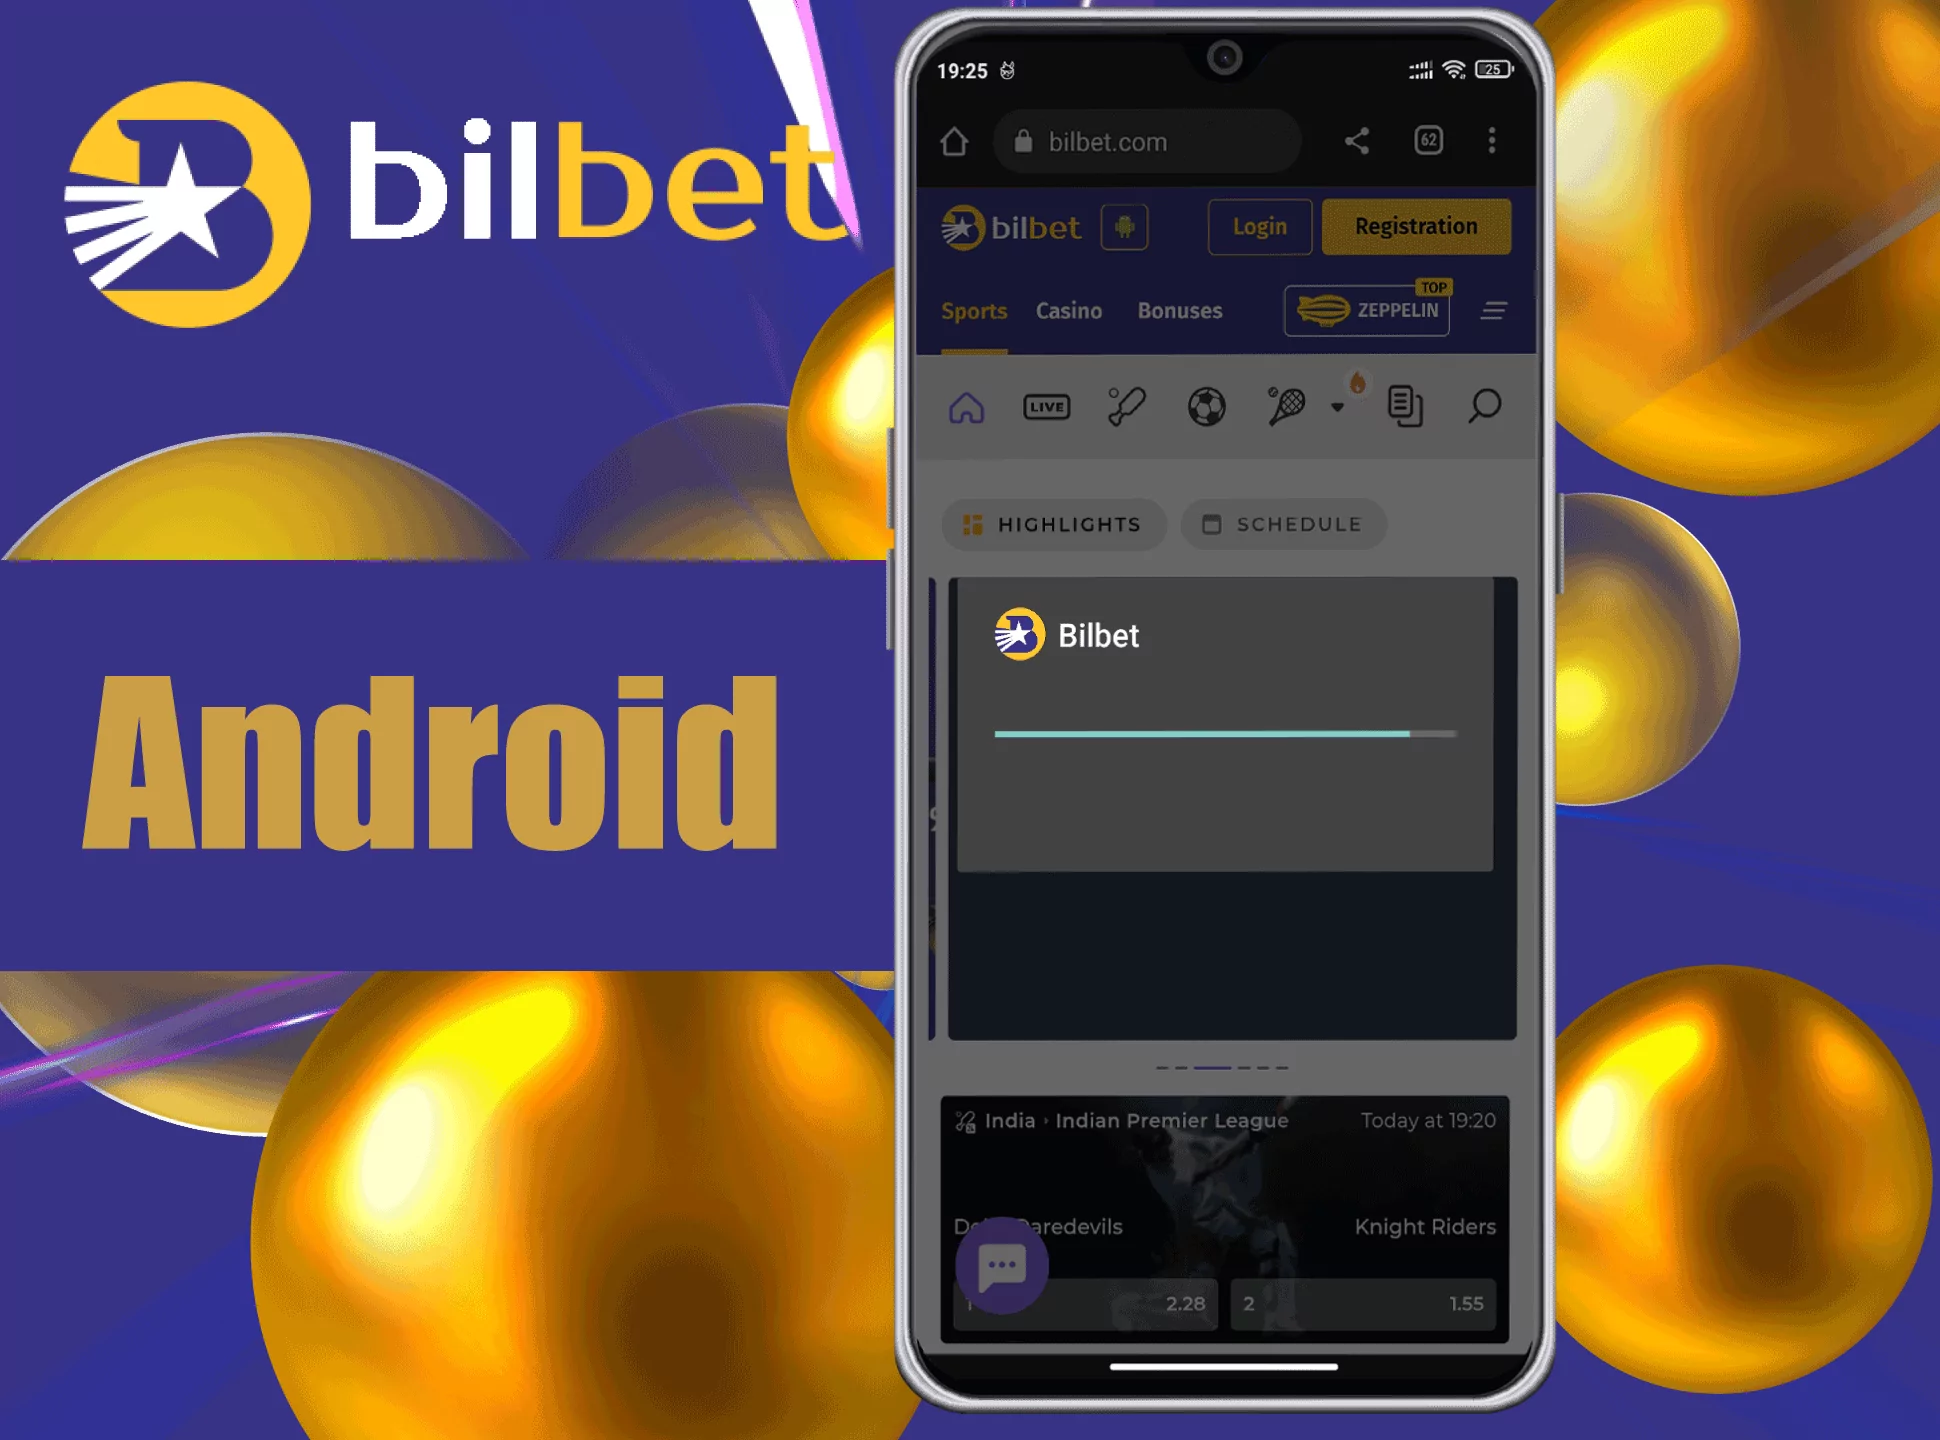 Visit the Bilbet website and download the Bilbet apk file.